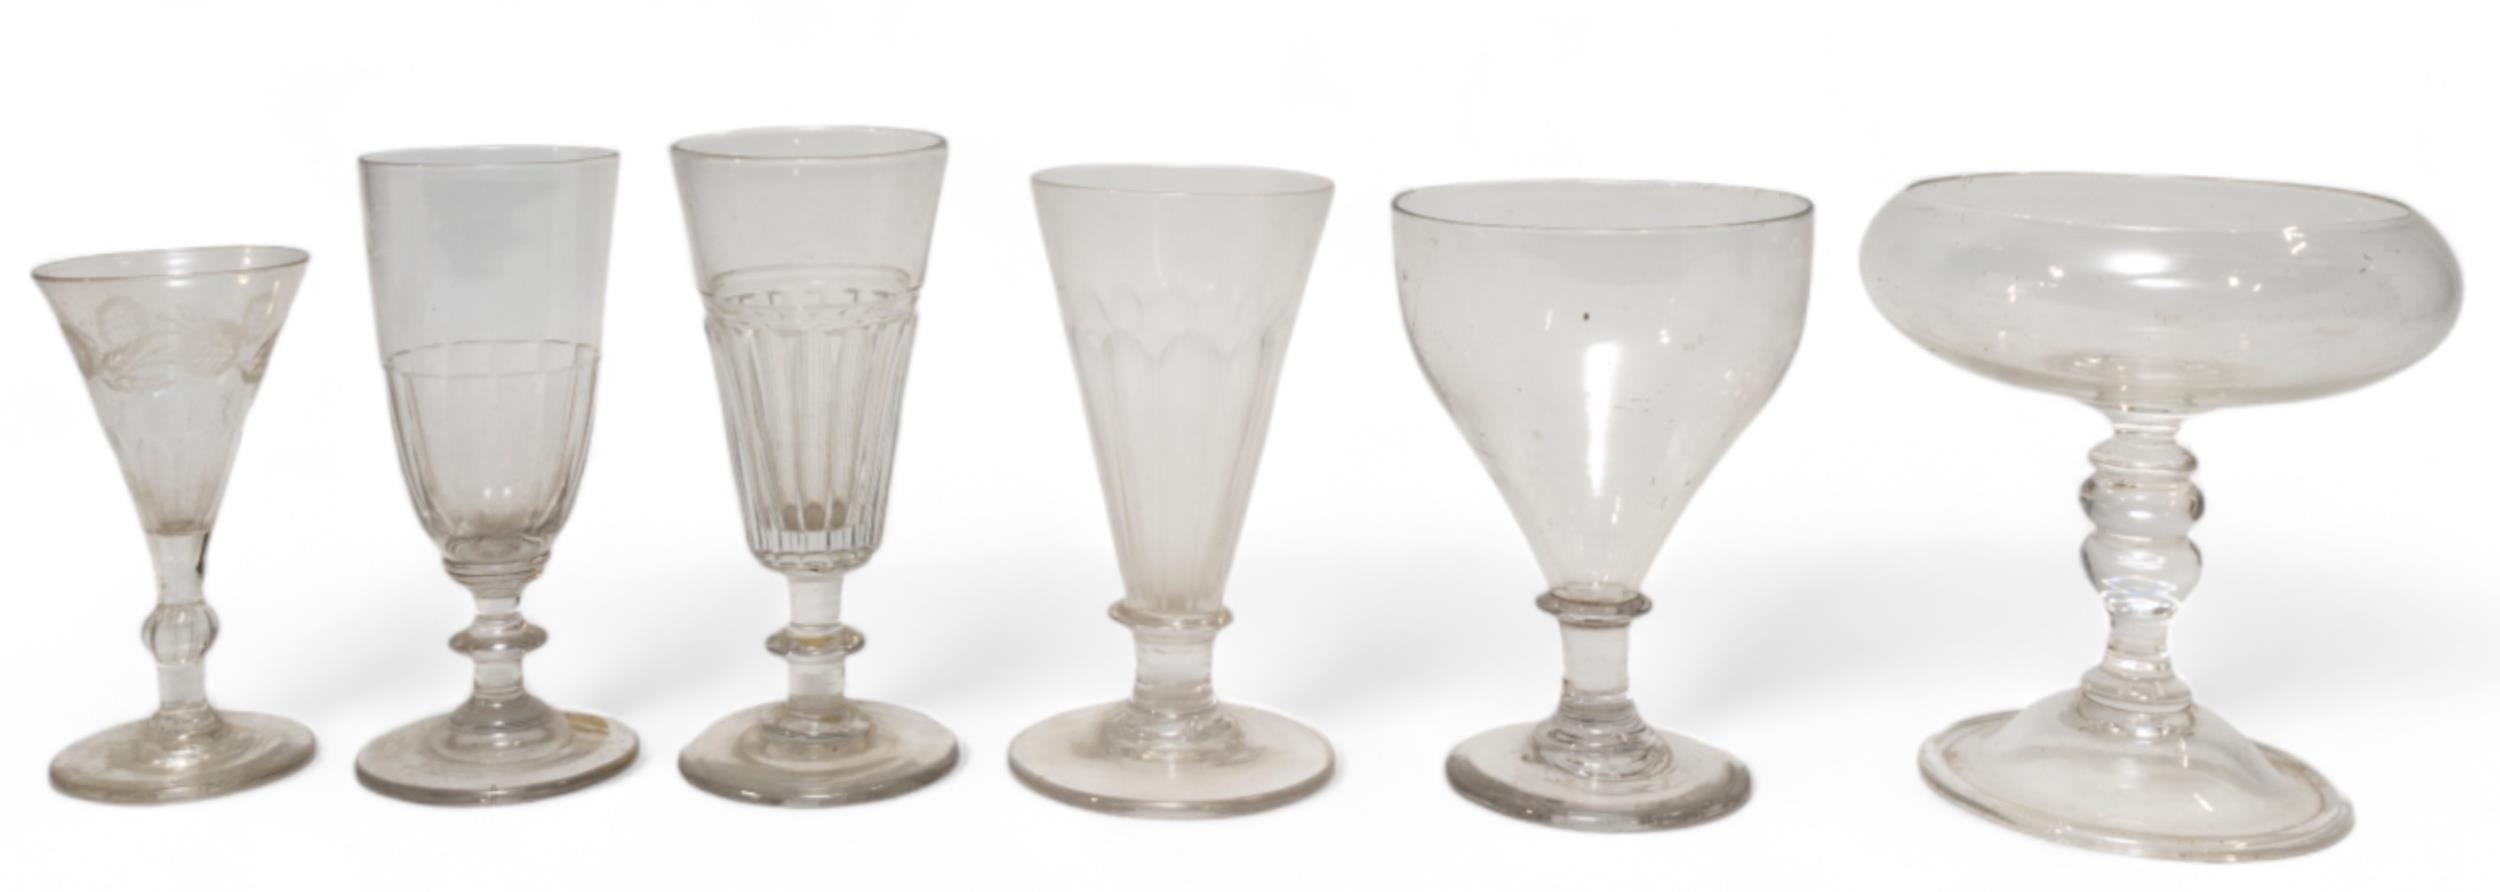 A LARGE MIXED GROUP OF STEMMED GLASSES AND TUMBLERS, PREDOMINANTLY 18TH/19TH CENTURY, the group - Image 5 of 7